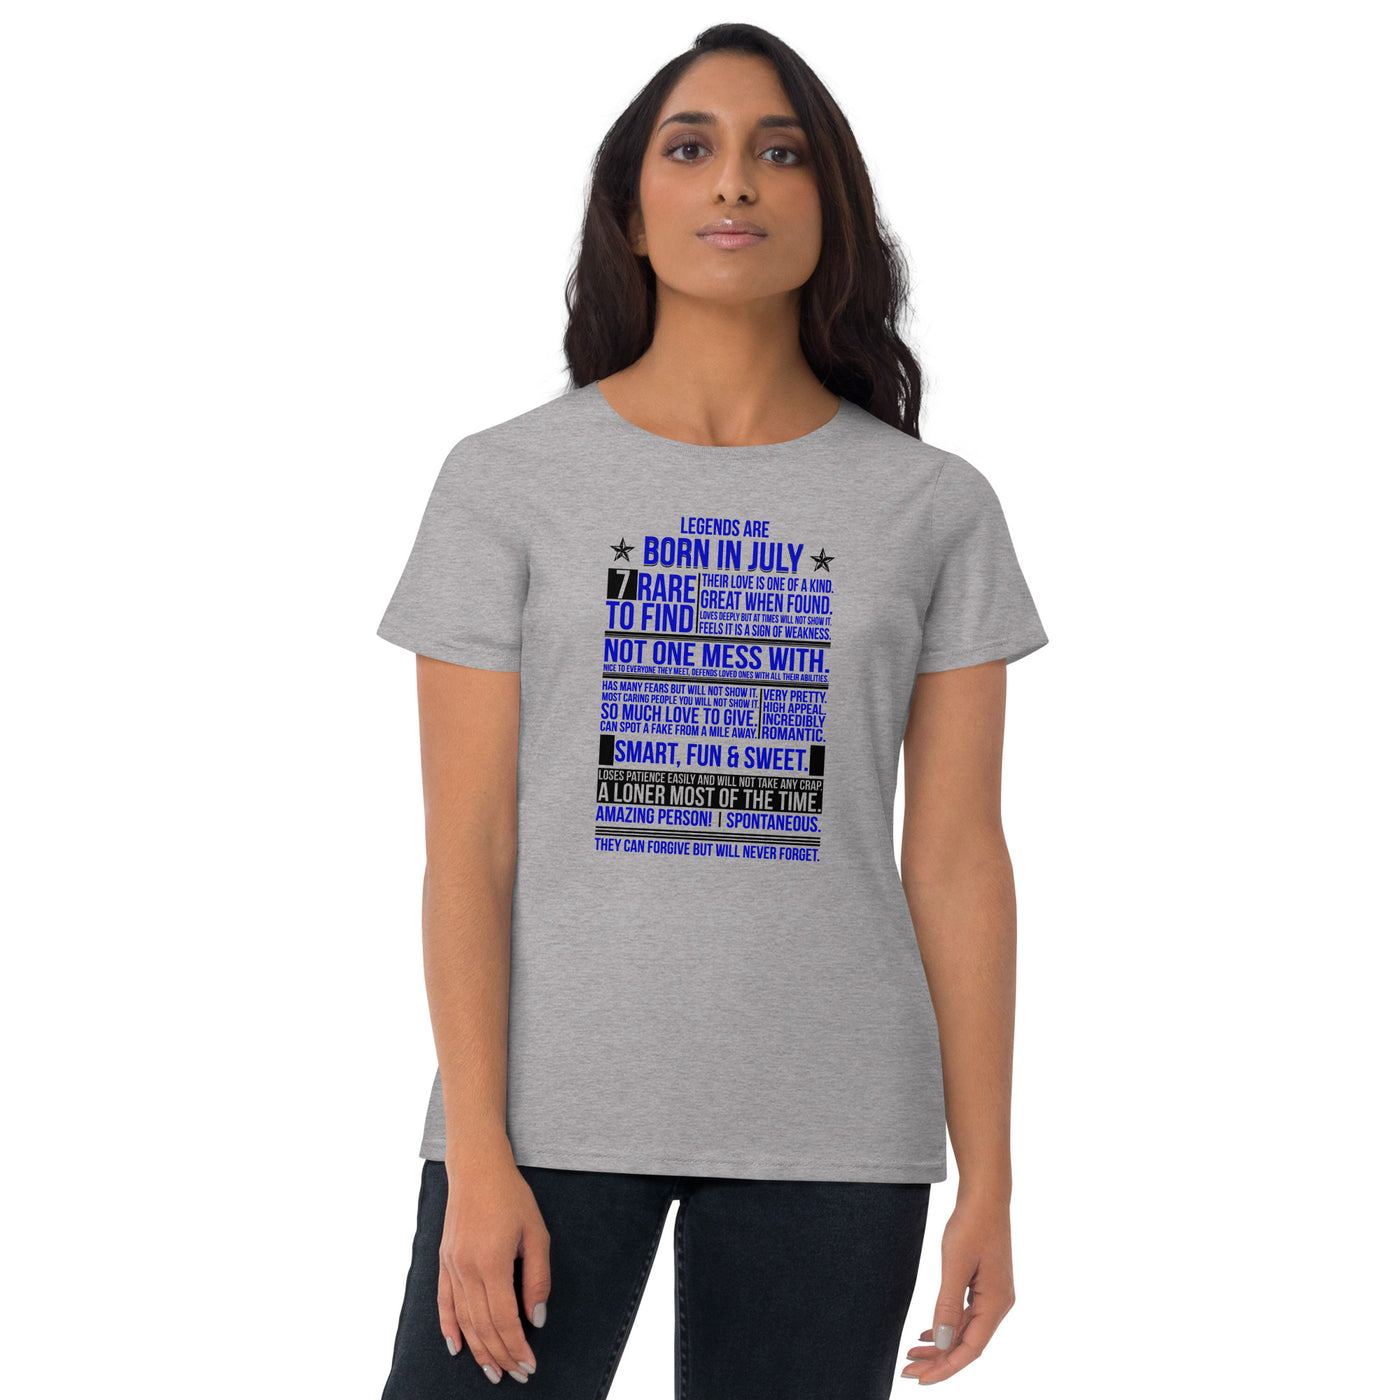 Legends Are Born In July Women's Short Sleeve T-Shirt